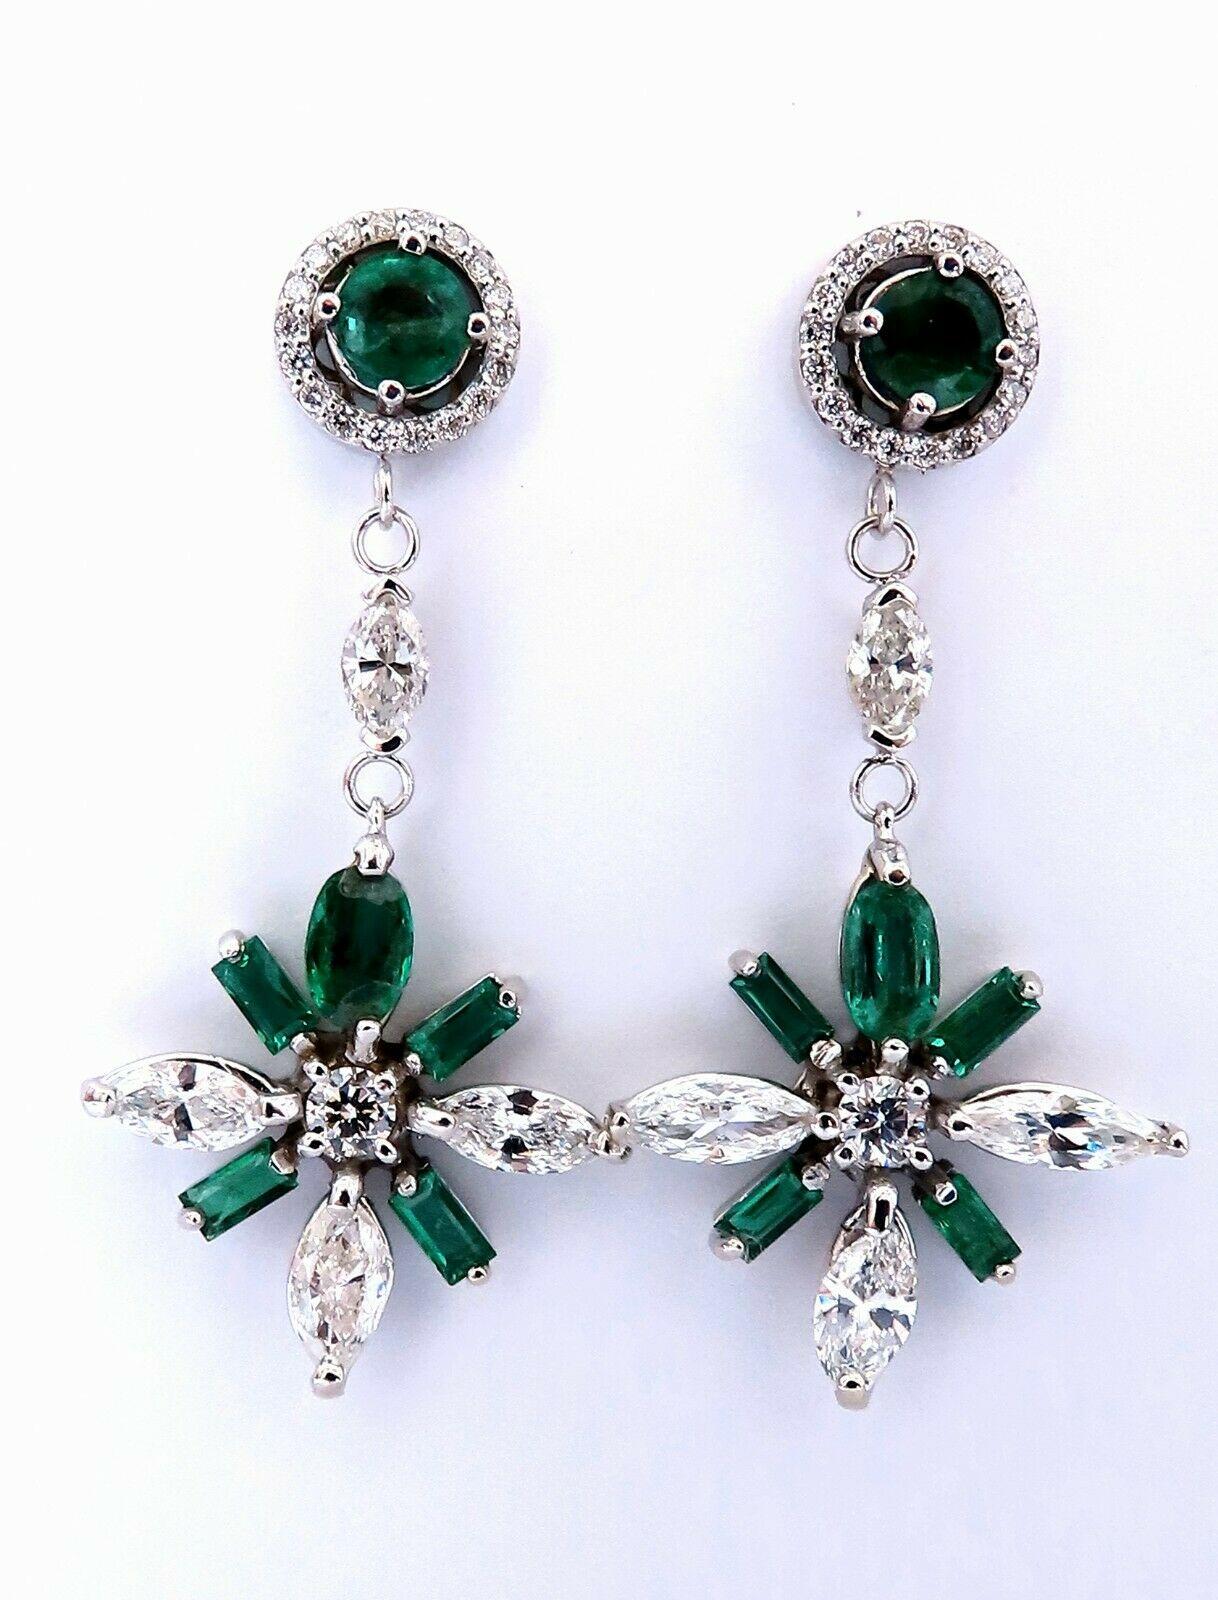 Snowflake Dangle cluster earrings.

3 carat natural round, Marquis and emerald cut emeralds.

Full cut brilliant clean clarity and transparent

2.50 carat round & marquis diamonds

H color vs2 clarity

14 karat white gold 8.9 g

Earrings measure